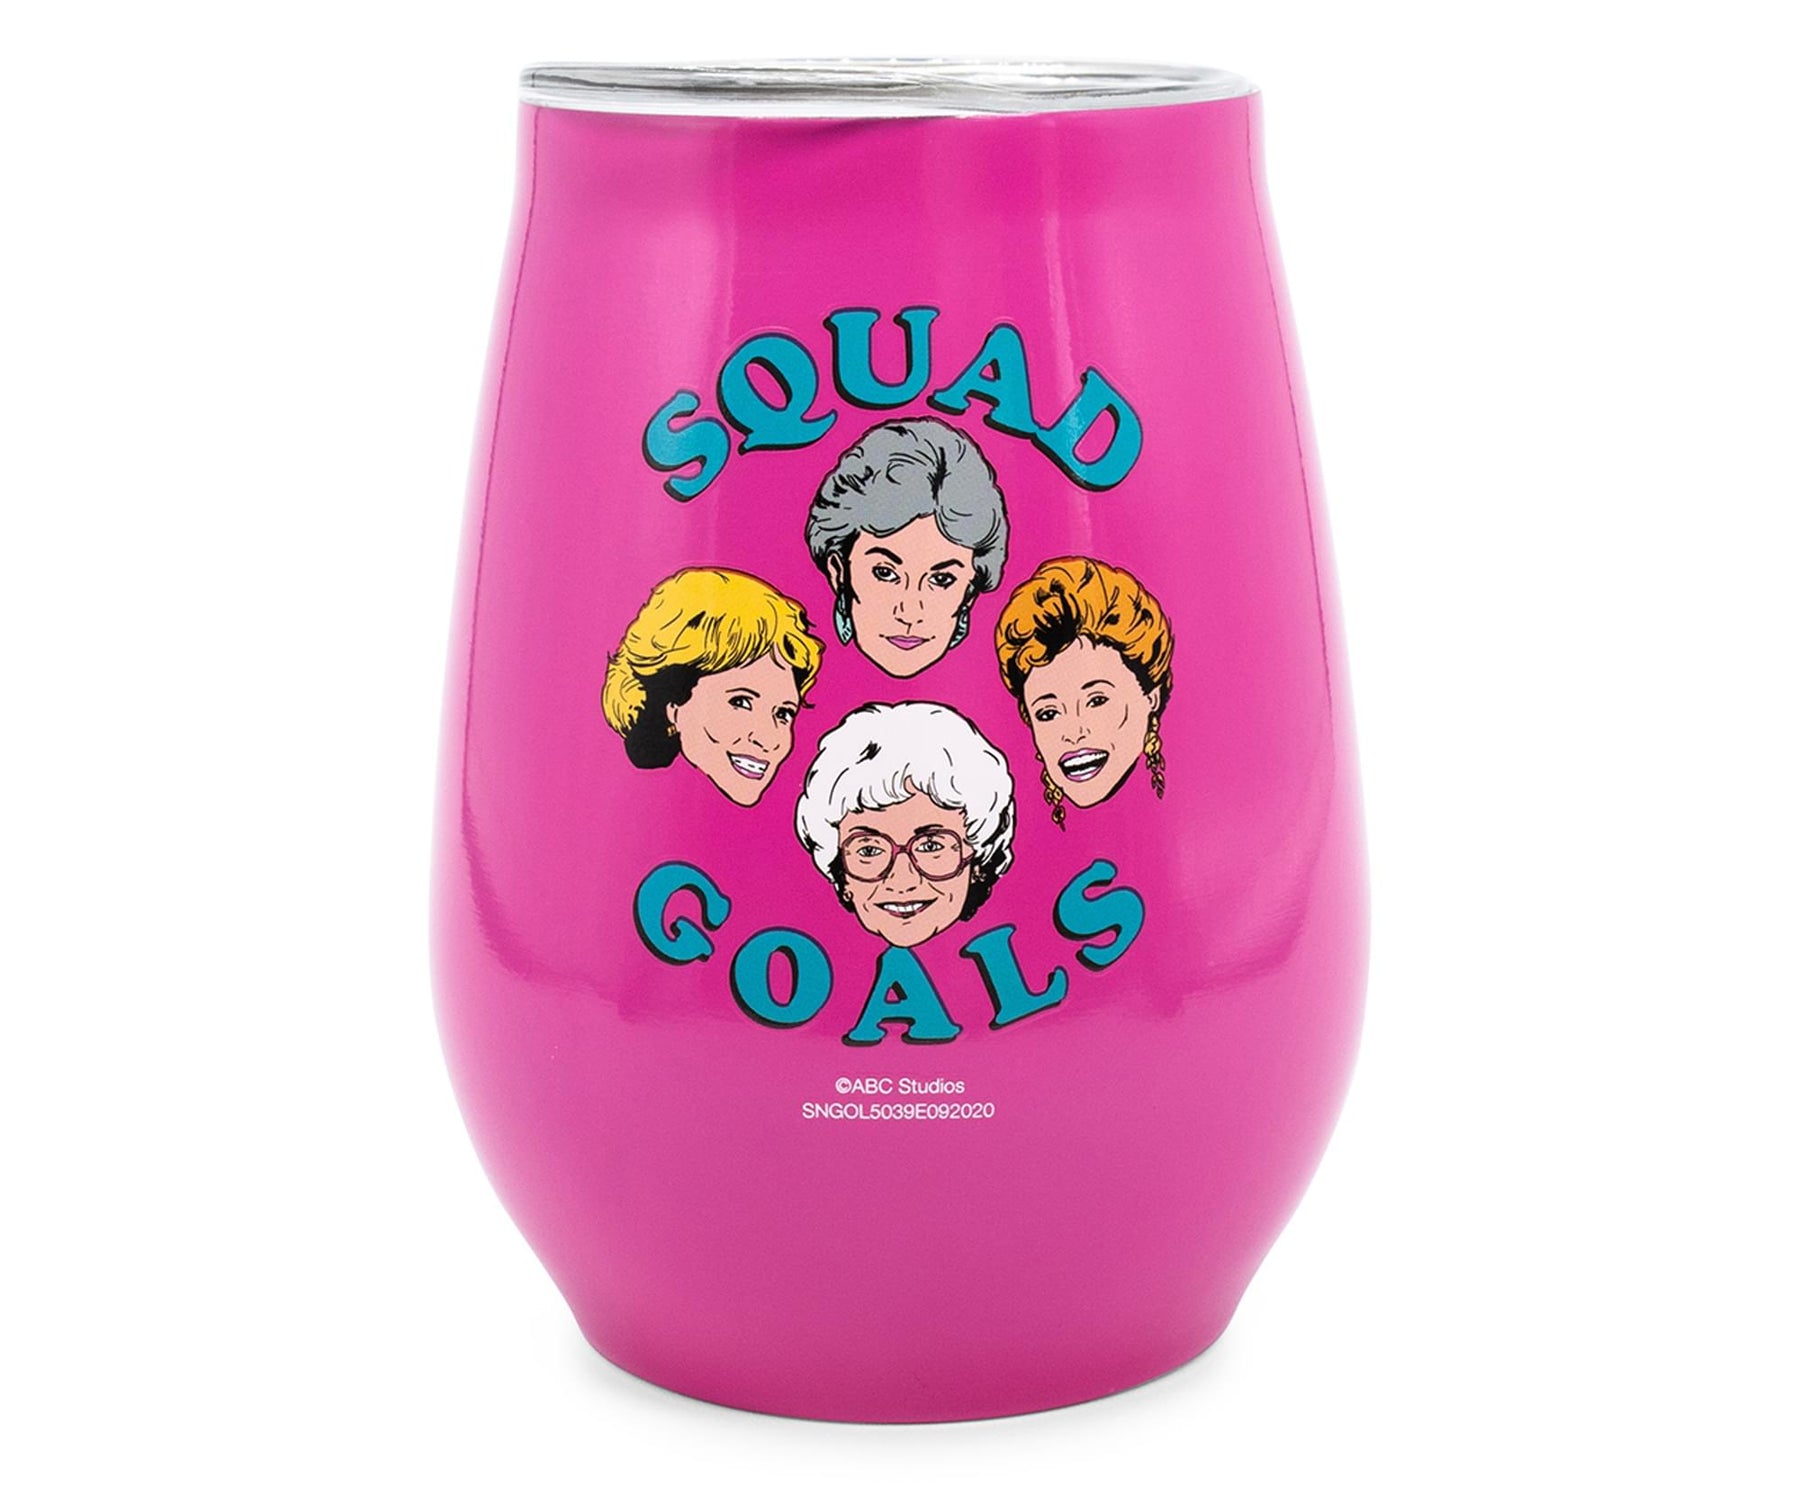 The Golden Girls "Squad Goals" 10-Ounce Stainless Steel Stemless Tumbler w/ Lid